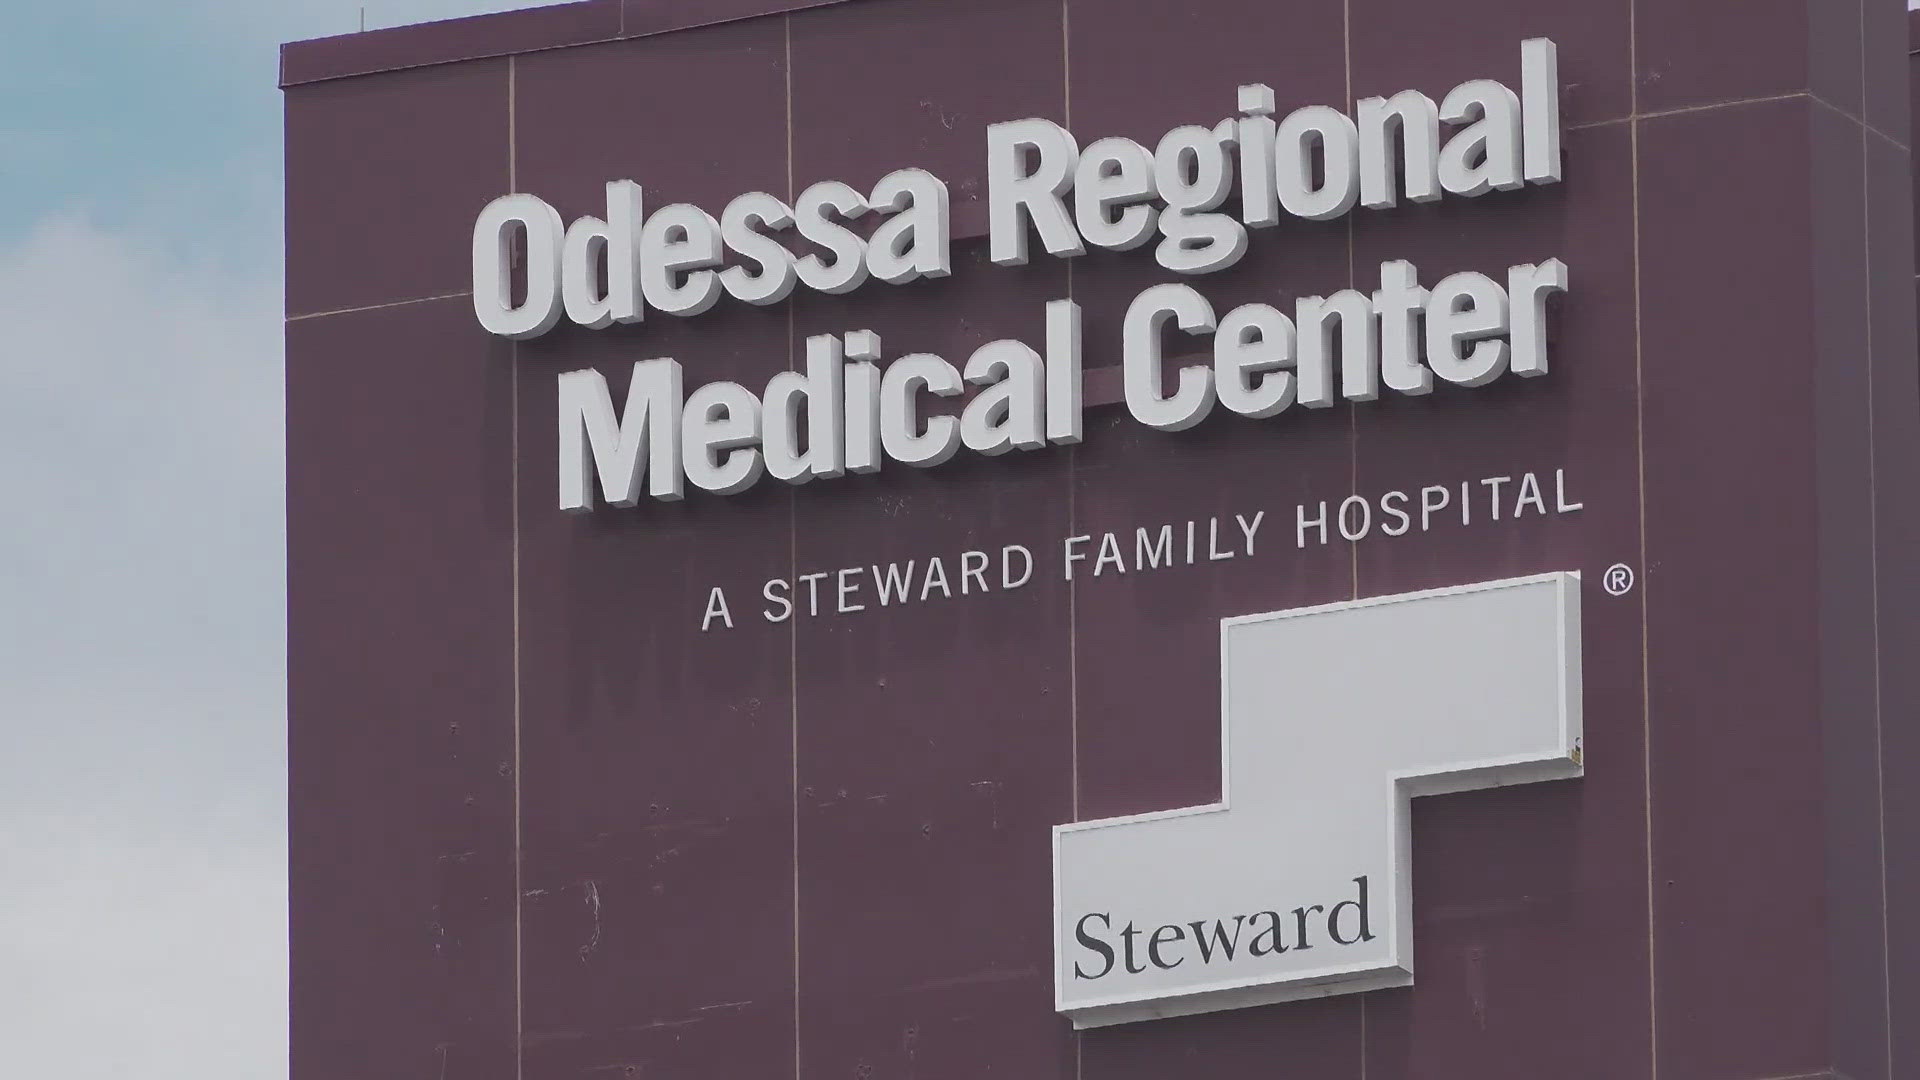 The healthcare system operates ORMC in Odessa and SMMC in Big Spring. The voluntary decision to file will not impact patients, employees or day-to-day operations.